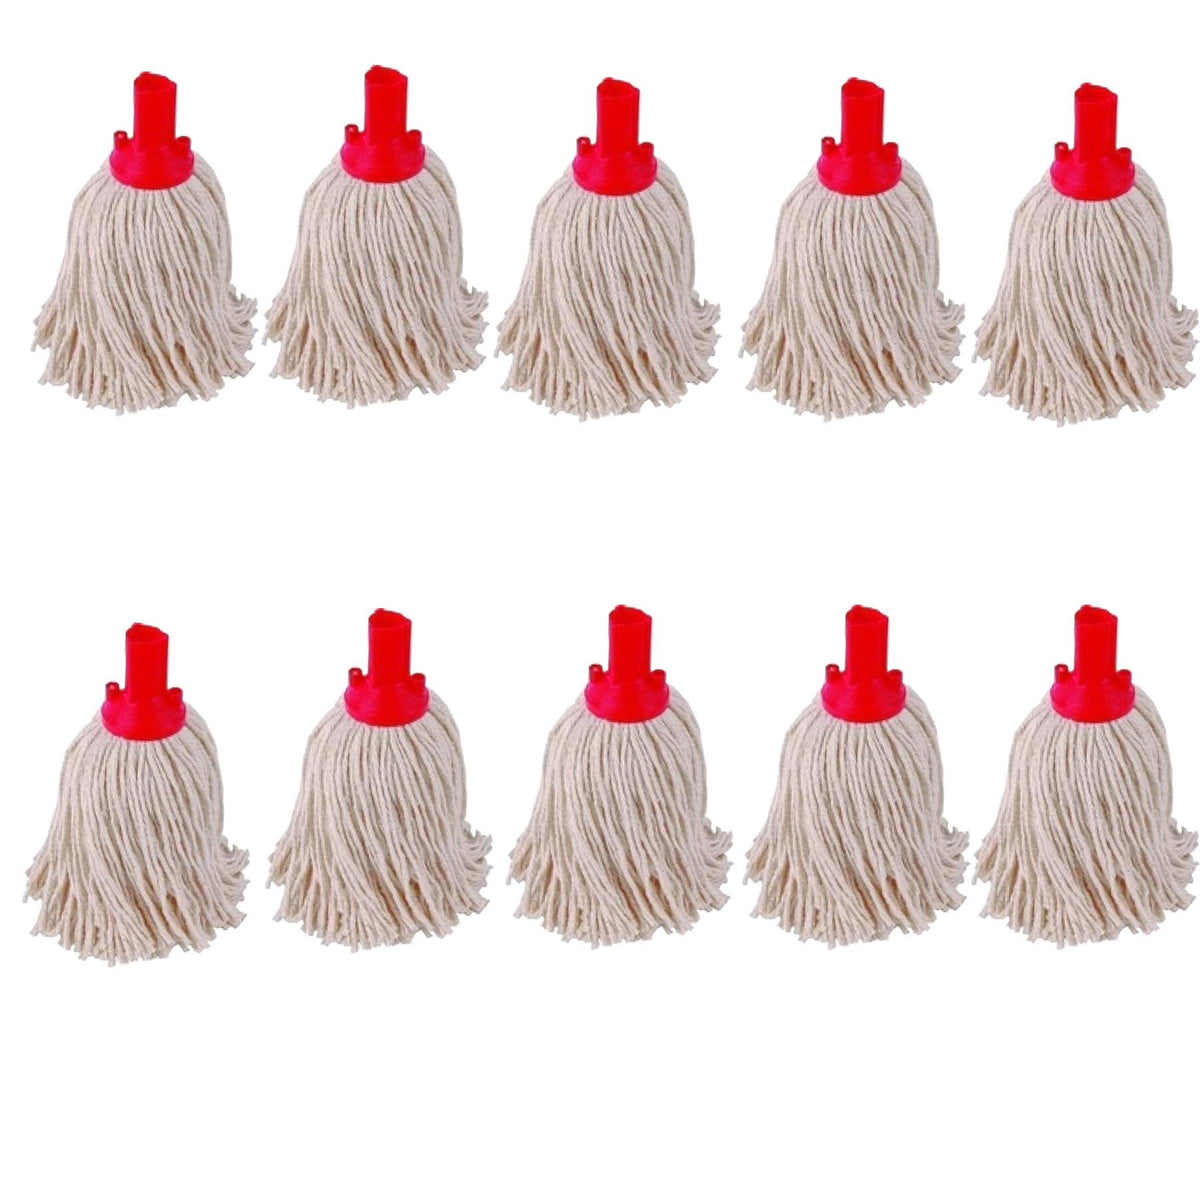 Exel Cotton Mop Heads 250 grams Pack of 10 Red